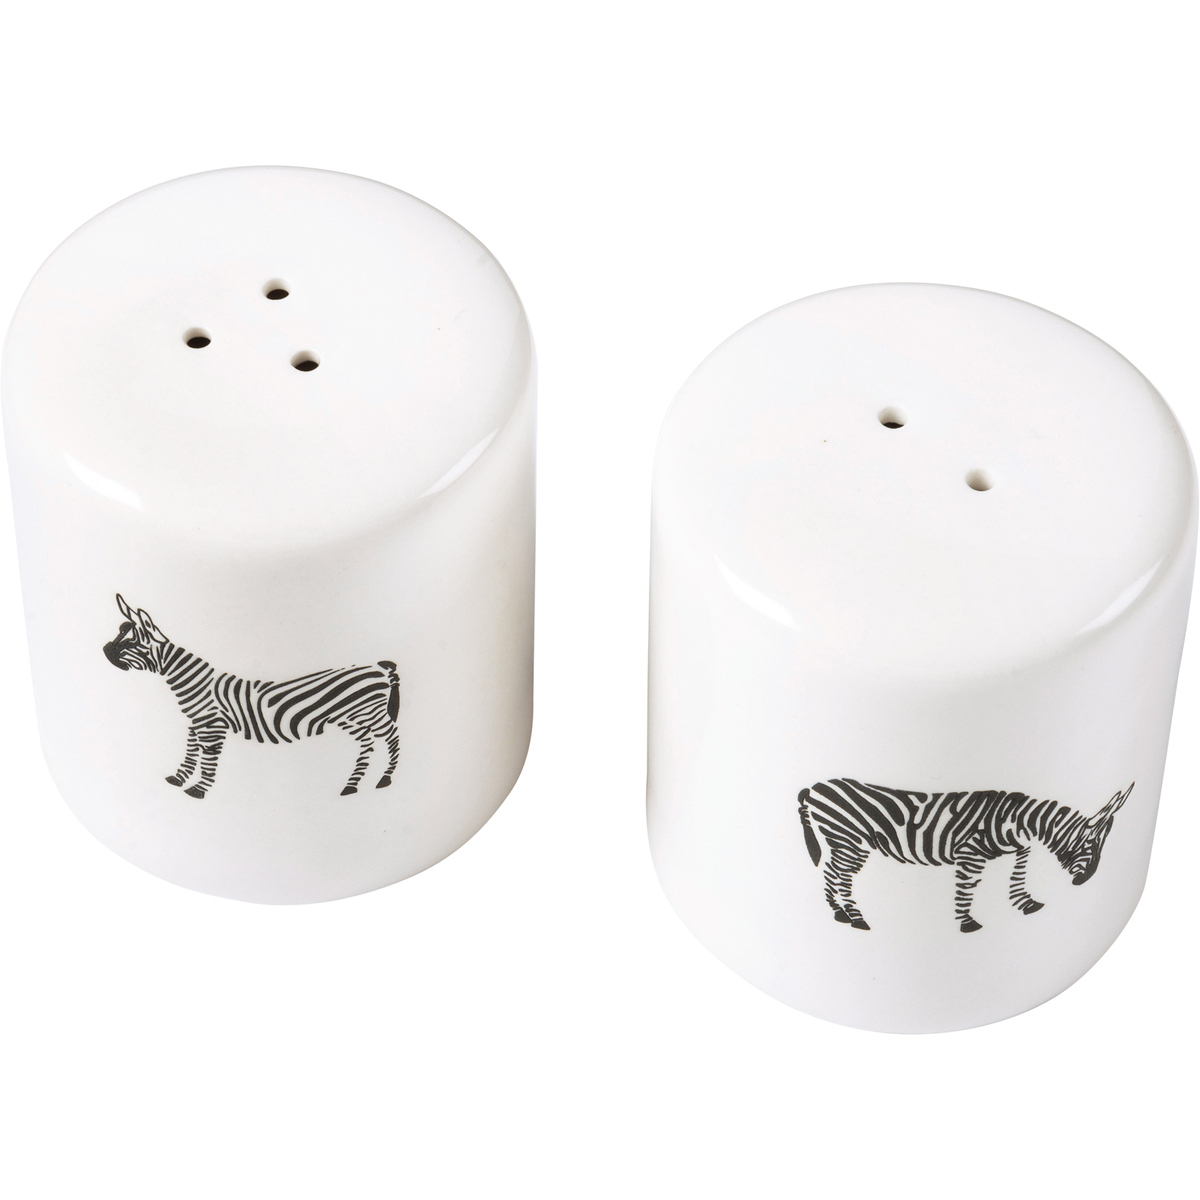 Why Are Some Salt And Pepper Shakers Microwave Safe?